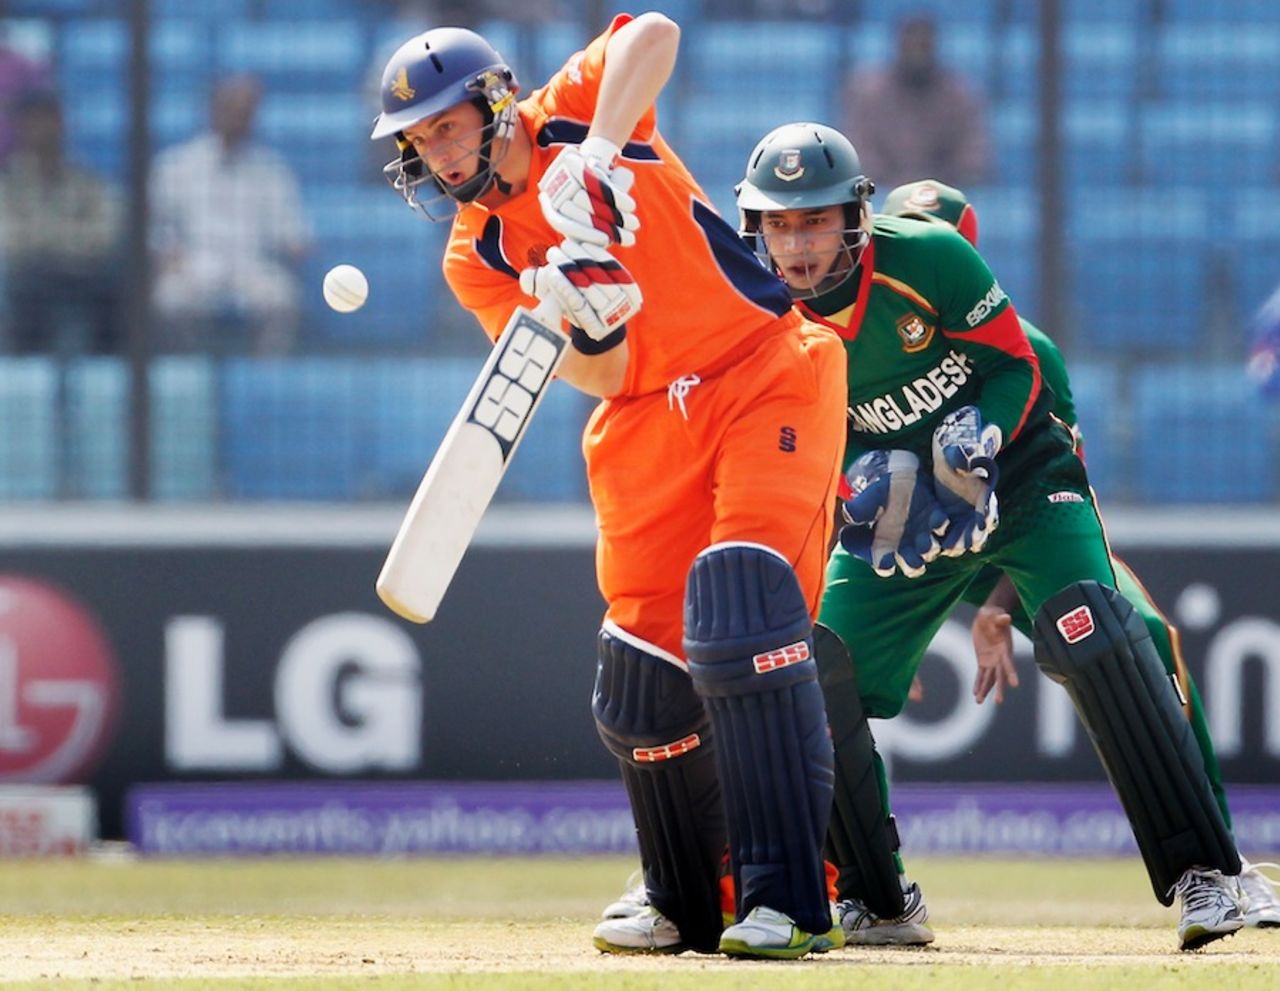 Wesley Barresi made 10 before he was dismissed lbw, Bangladesh v Netherlands, Group B, World Cup 2011, Chittagong, March 14, 2011